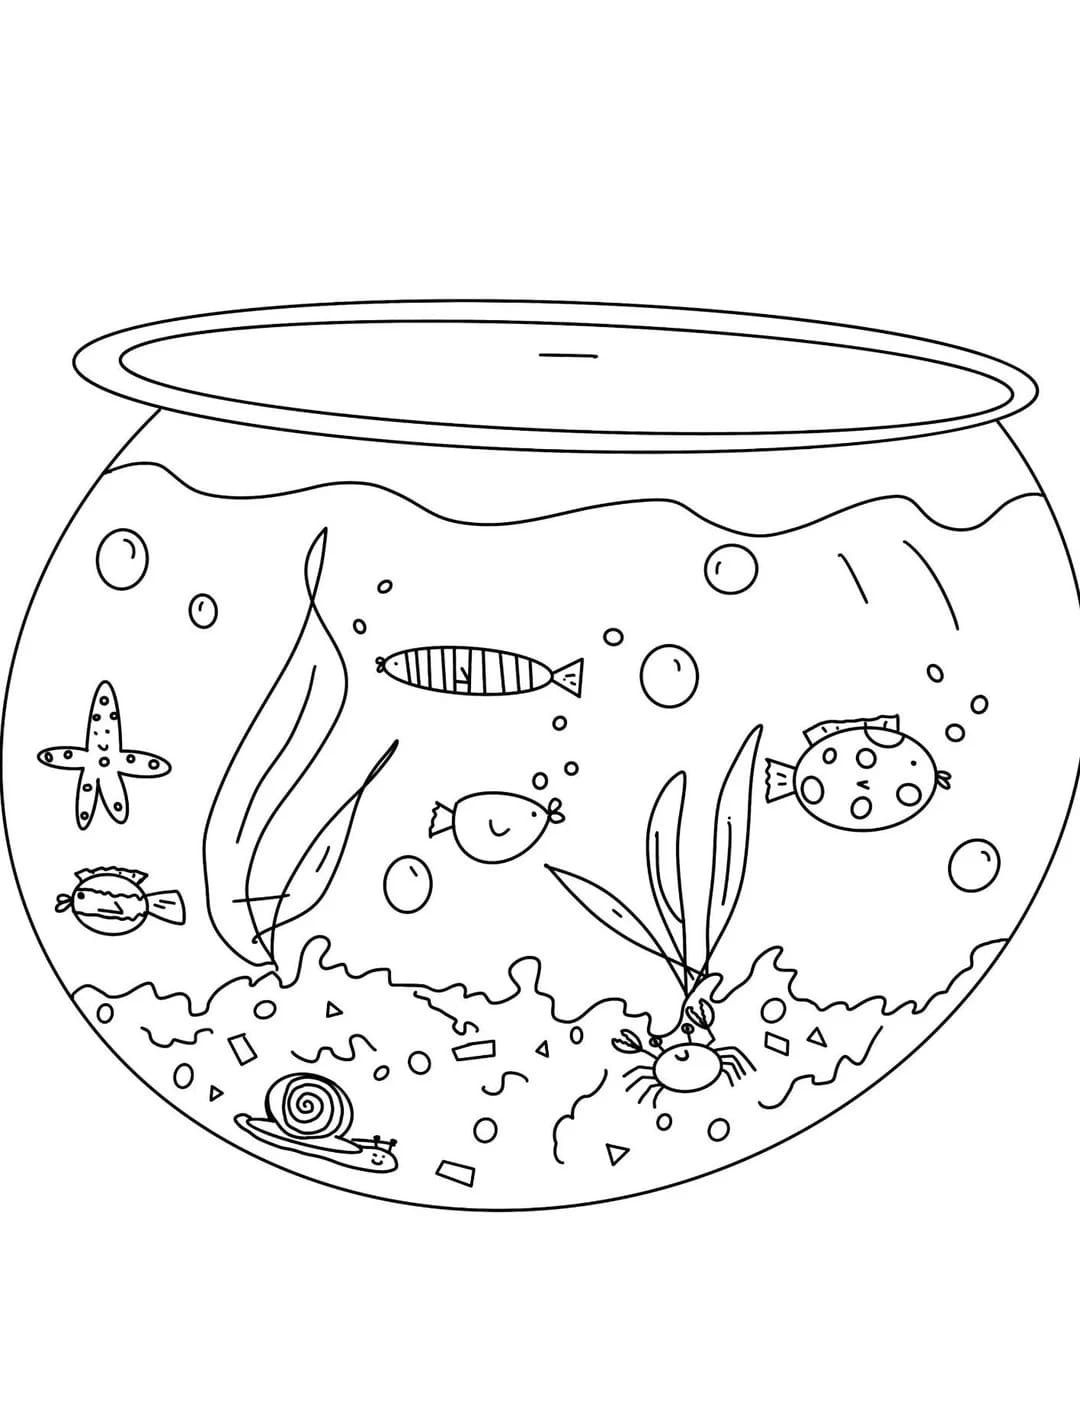 Fish bowl coloring pages printable for free download